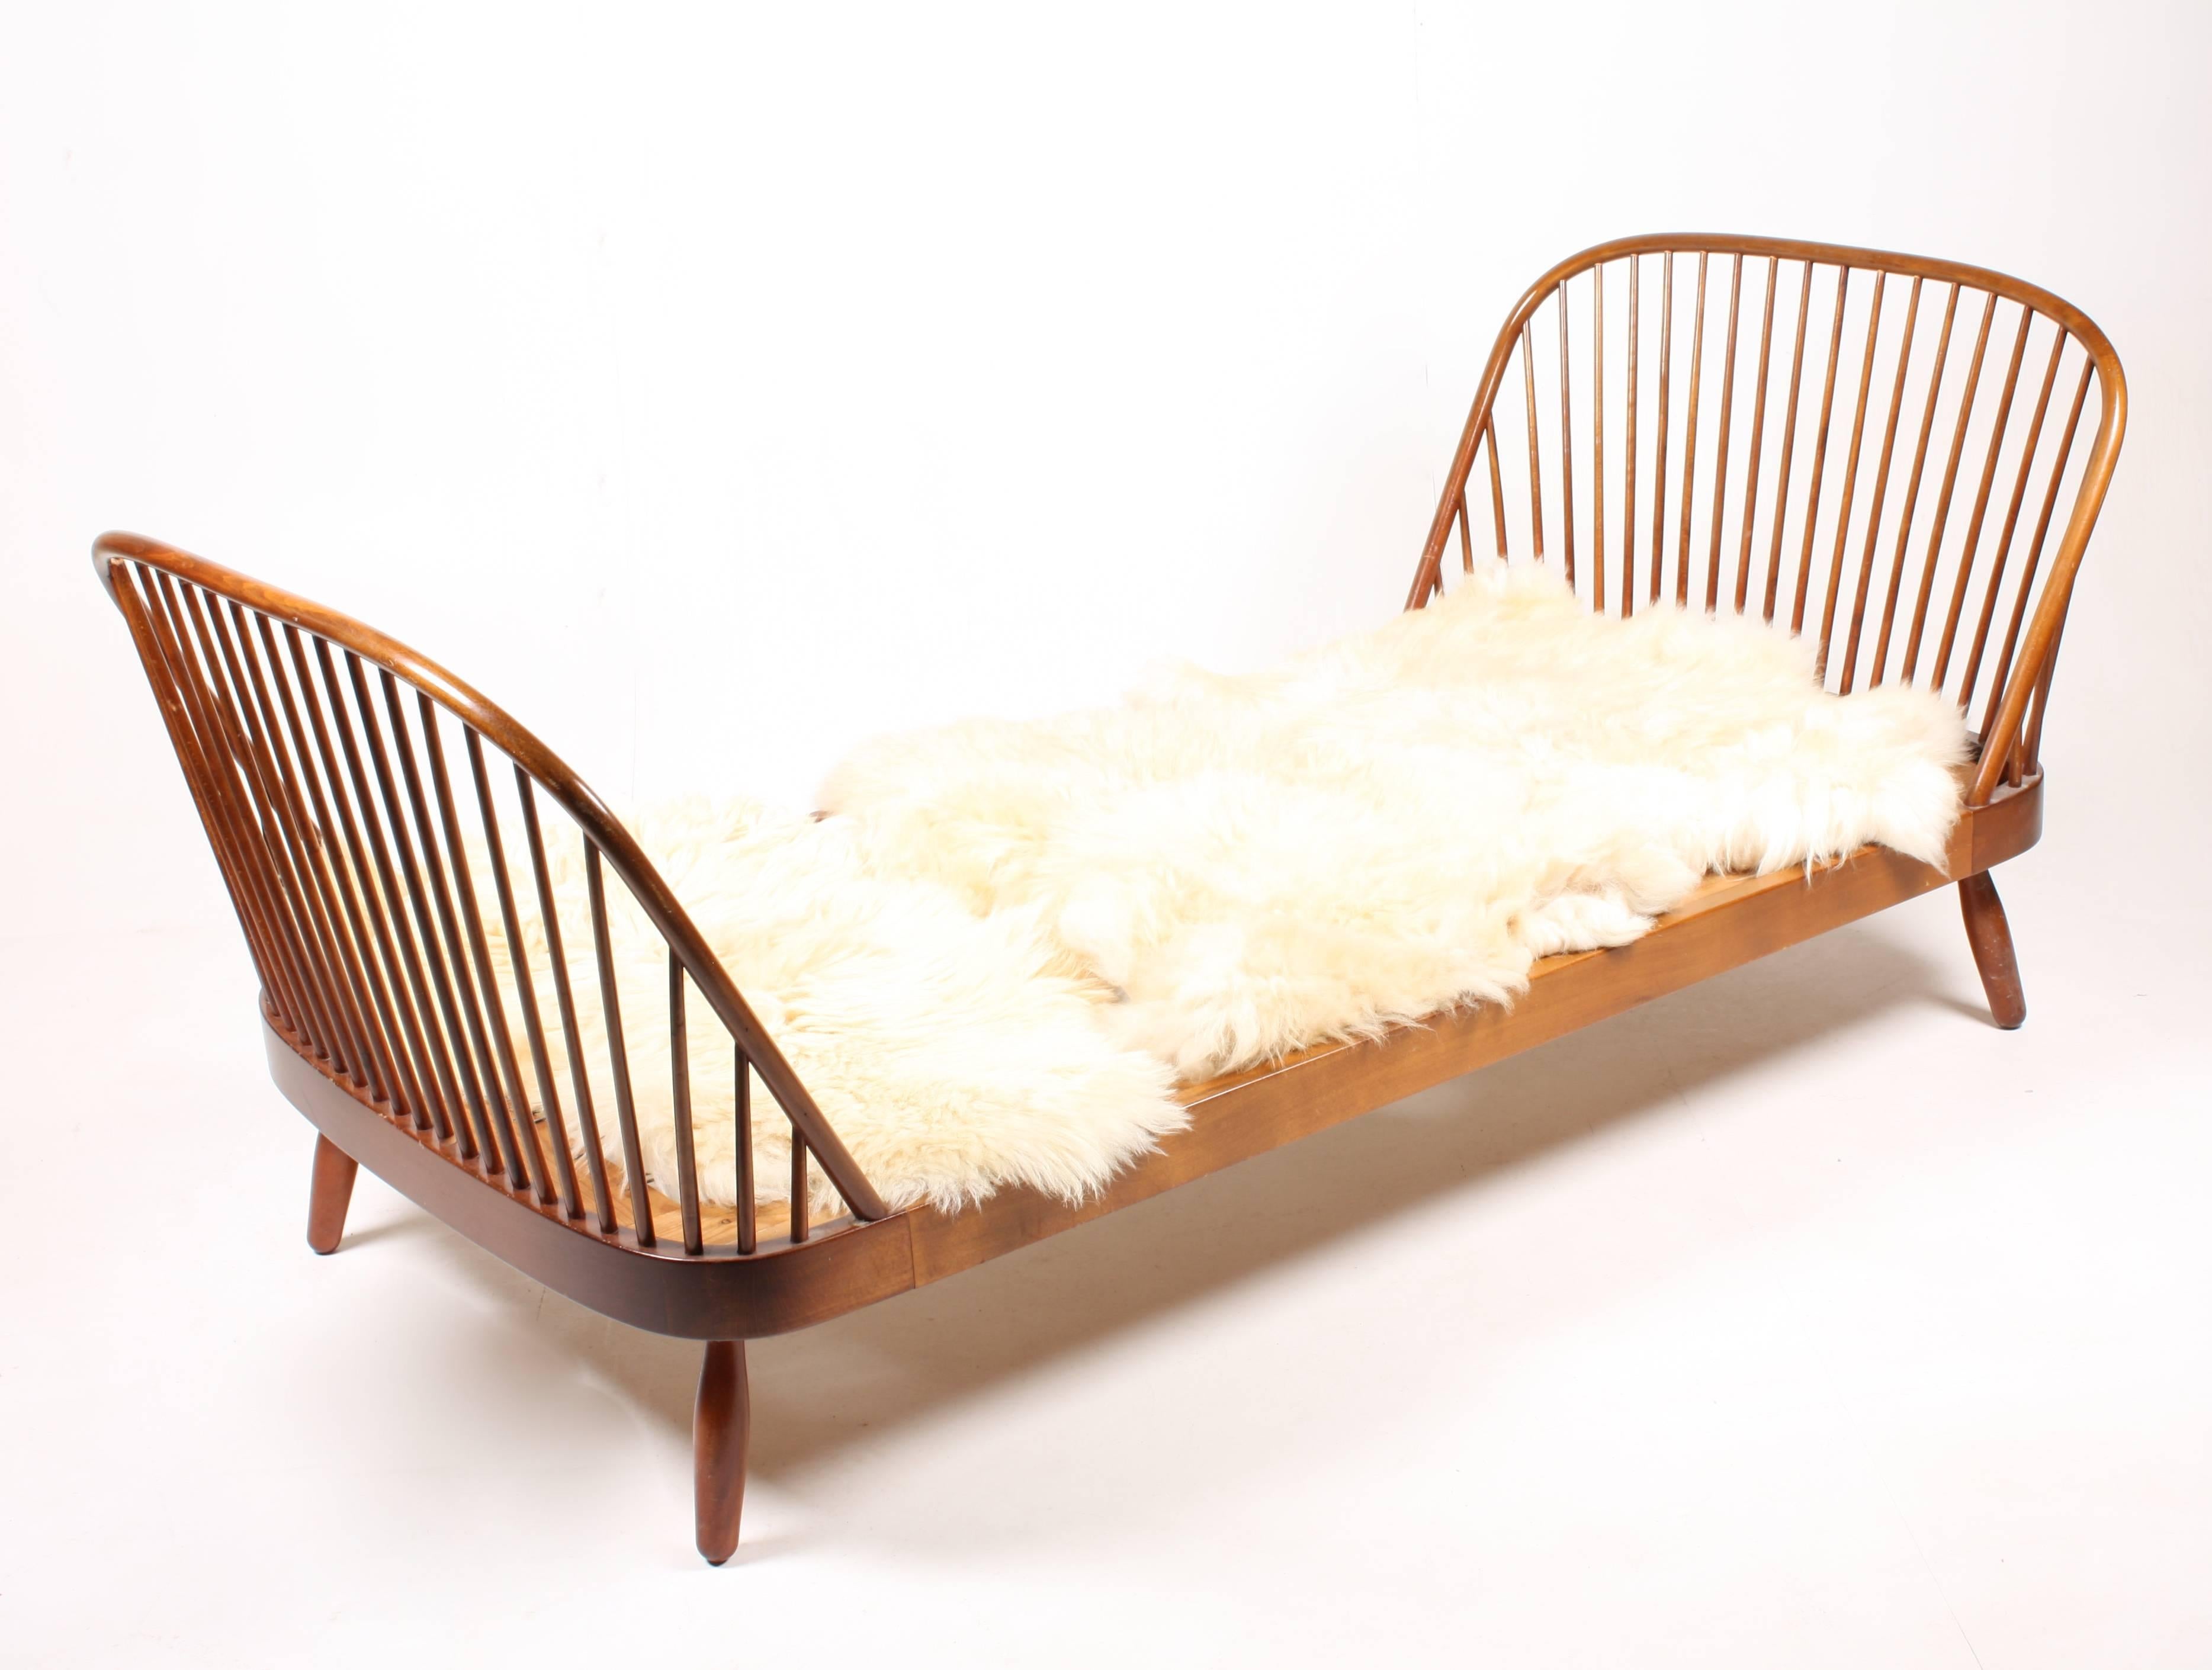 Great looking daybed in solid wood designed by Maa. Frode Holm for Illums Bolighus in the 1950s. Made in Denmark by H&F Tremmeværk cabinetmakers. Great original condition.